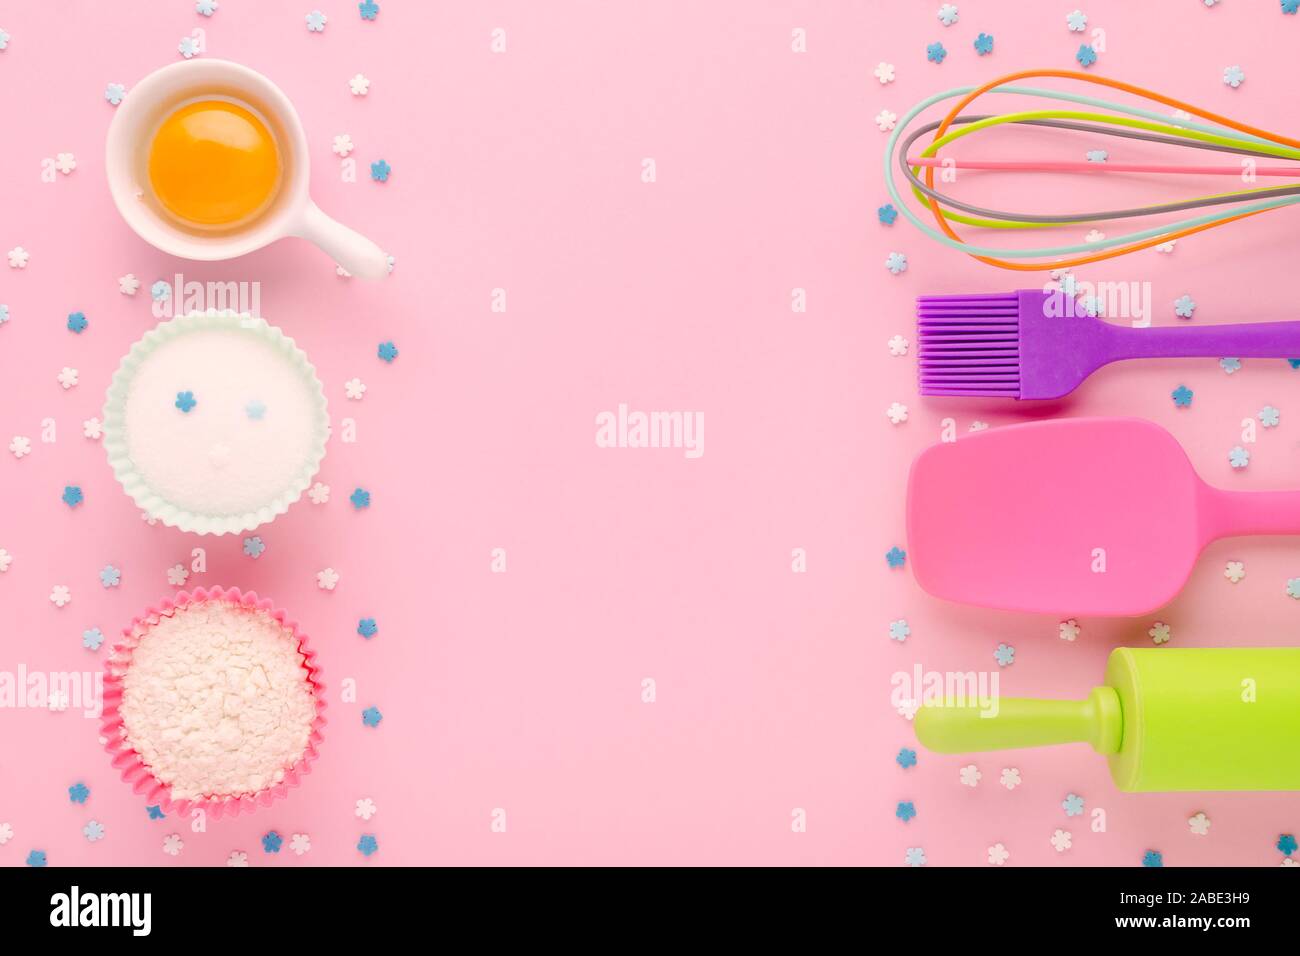 baking ingredients, egg, flour, sugar, sweet decoration and kitchen tools on pink background with copy space Stock Photo